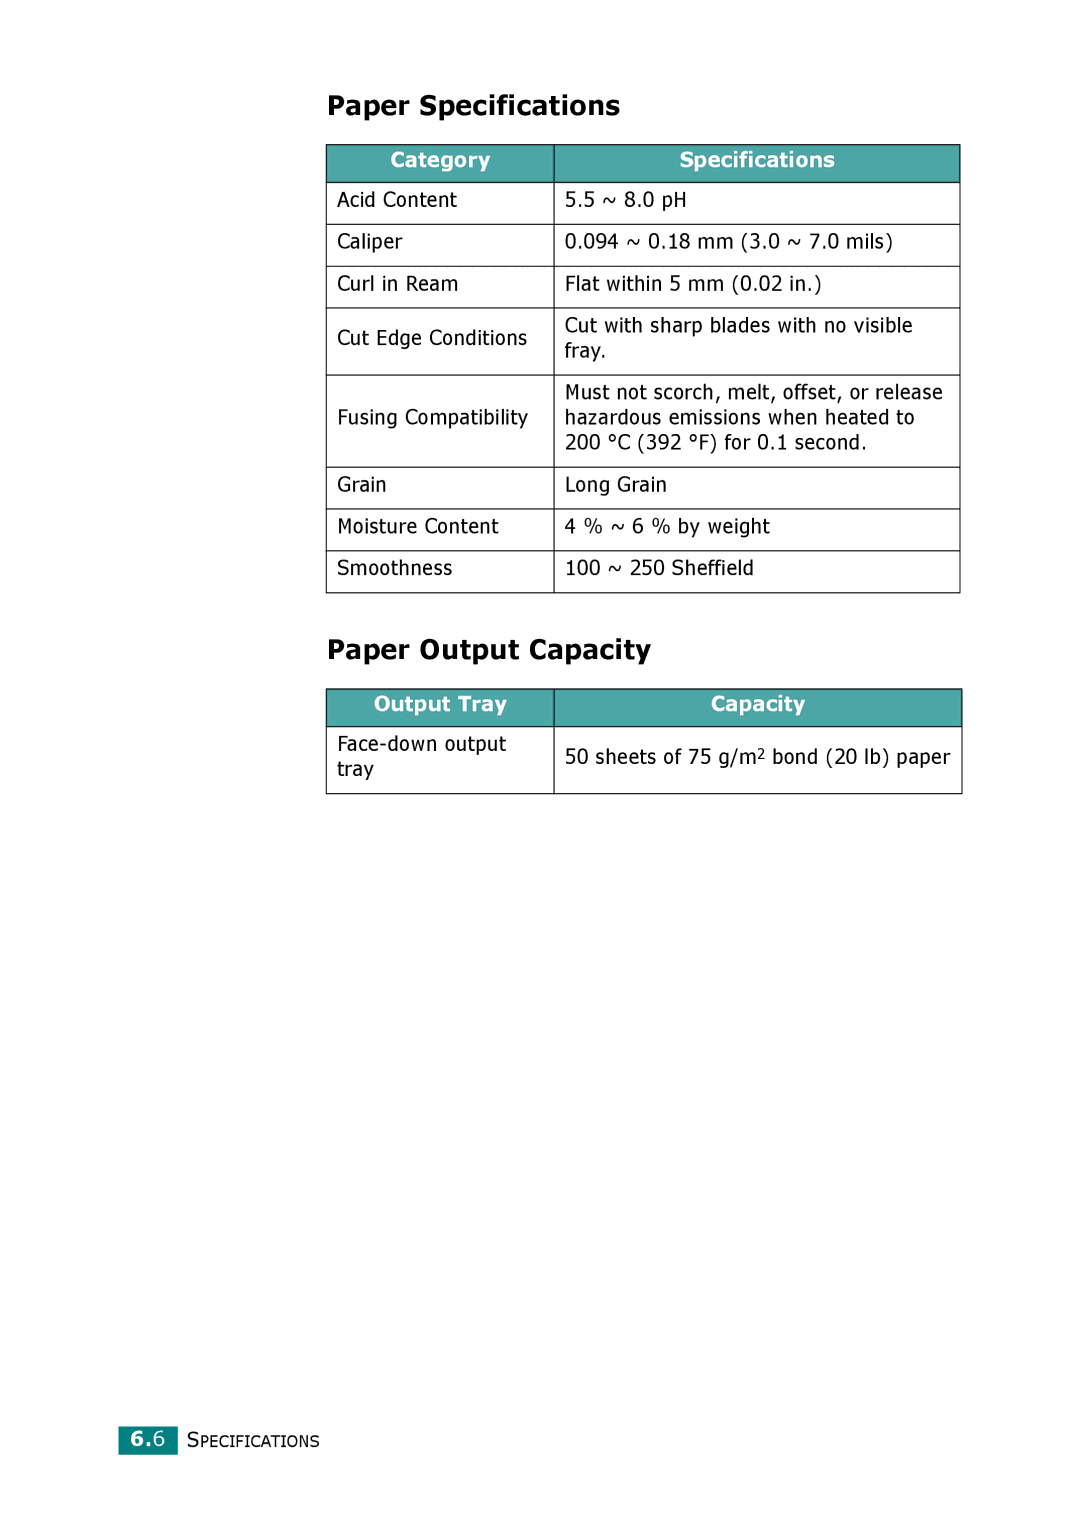 Xerox 3117 Paper Specifications, Paper Output Capacity, Category Specifications, Output Tray Capacity, Face-down output 